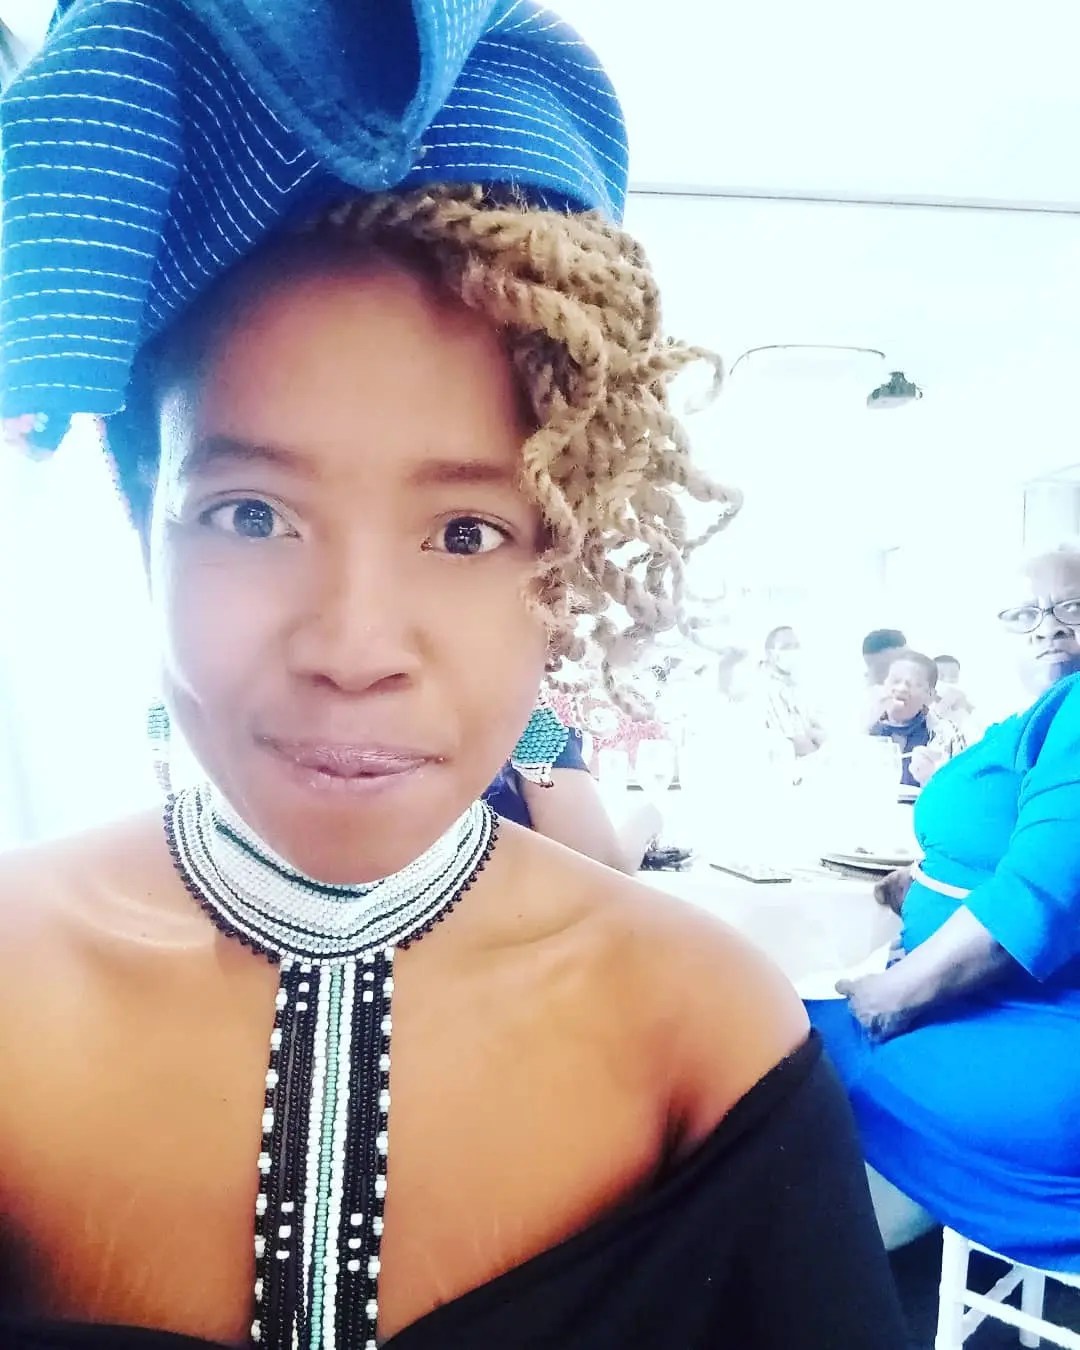 This is why Ntsiki Mazwai trended for all the wrong reasons